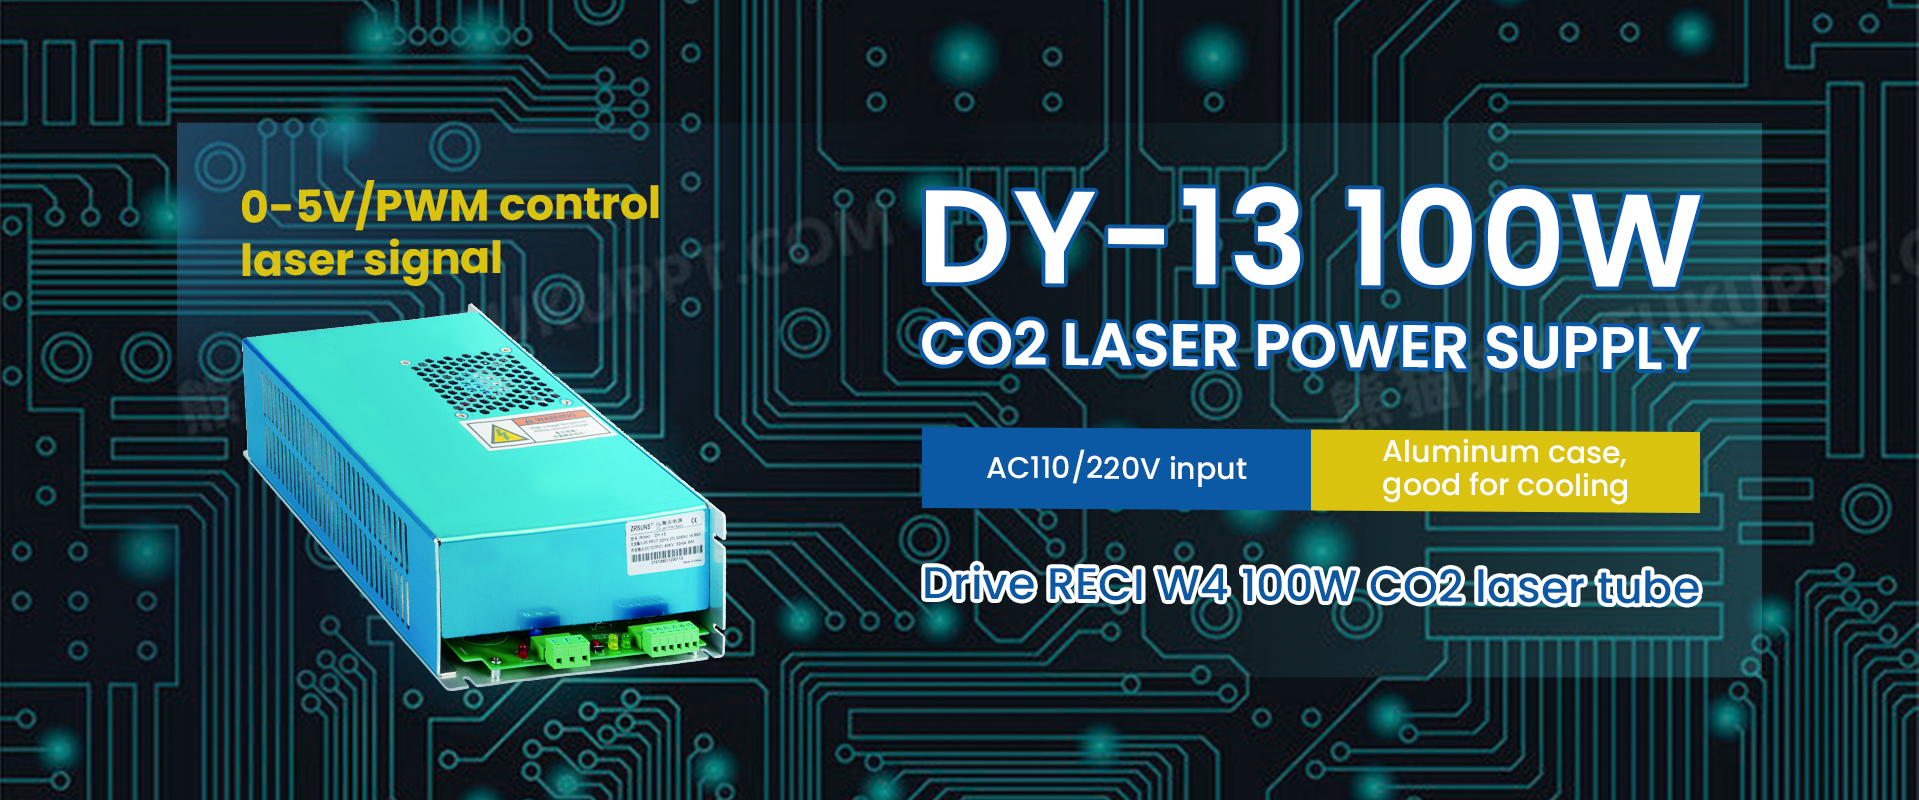 CO2 Power Supply For Laser Engraving Machine